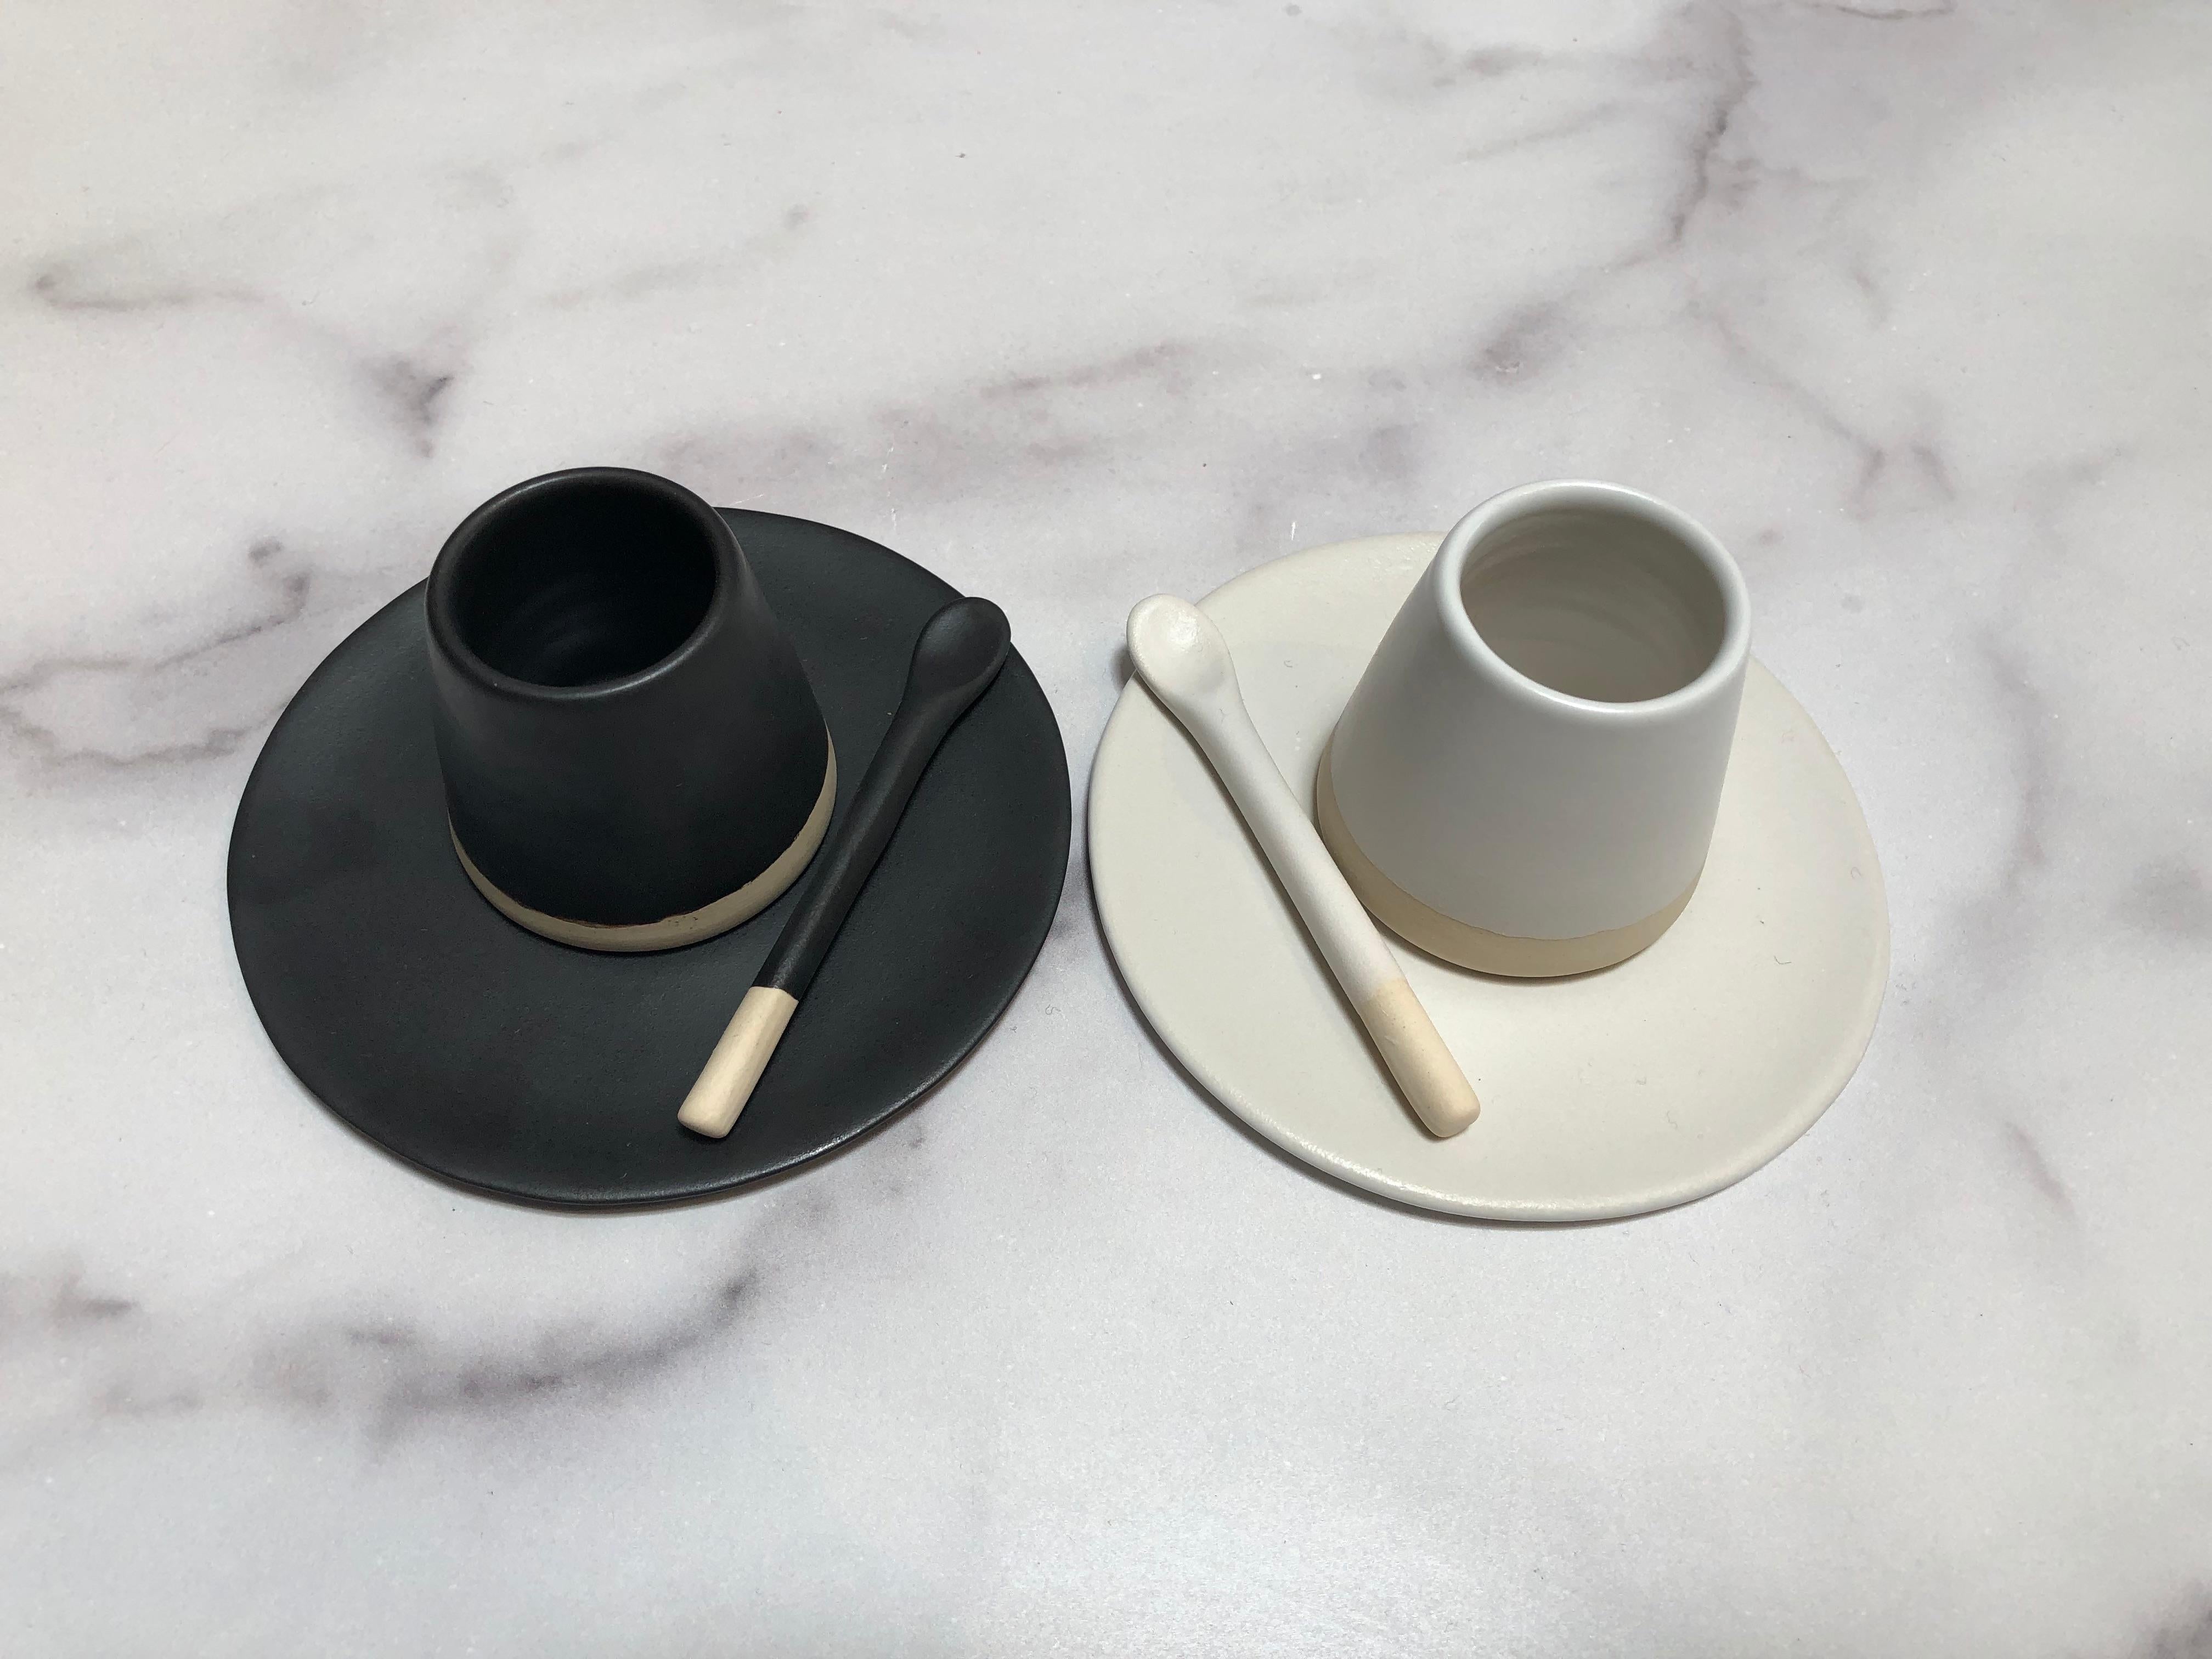 Handmade and hand painted ceramics from one of the mother countries, Portugal, these beautiful pieces for your table will add a modern touch and are perfect to mix and match. This matte-glazed saucer is available in black or white.

Size: 5”